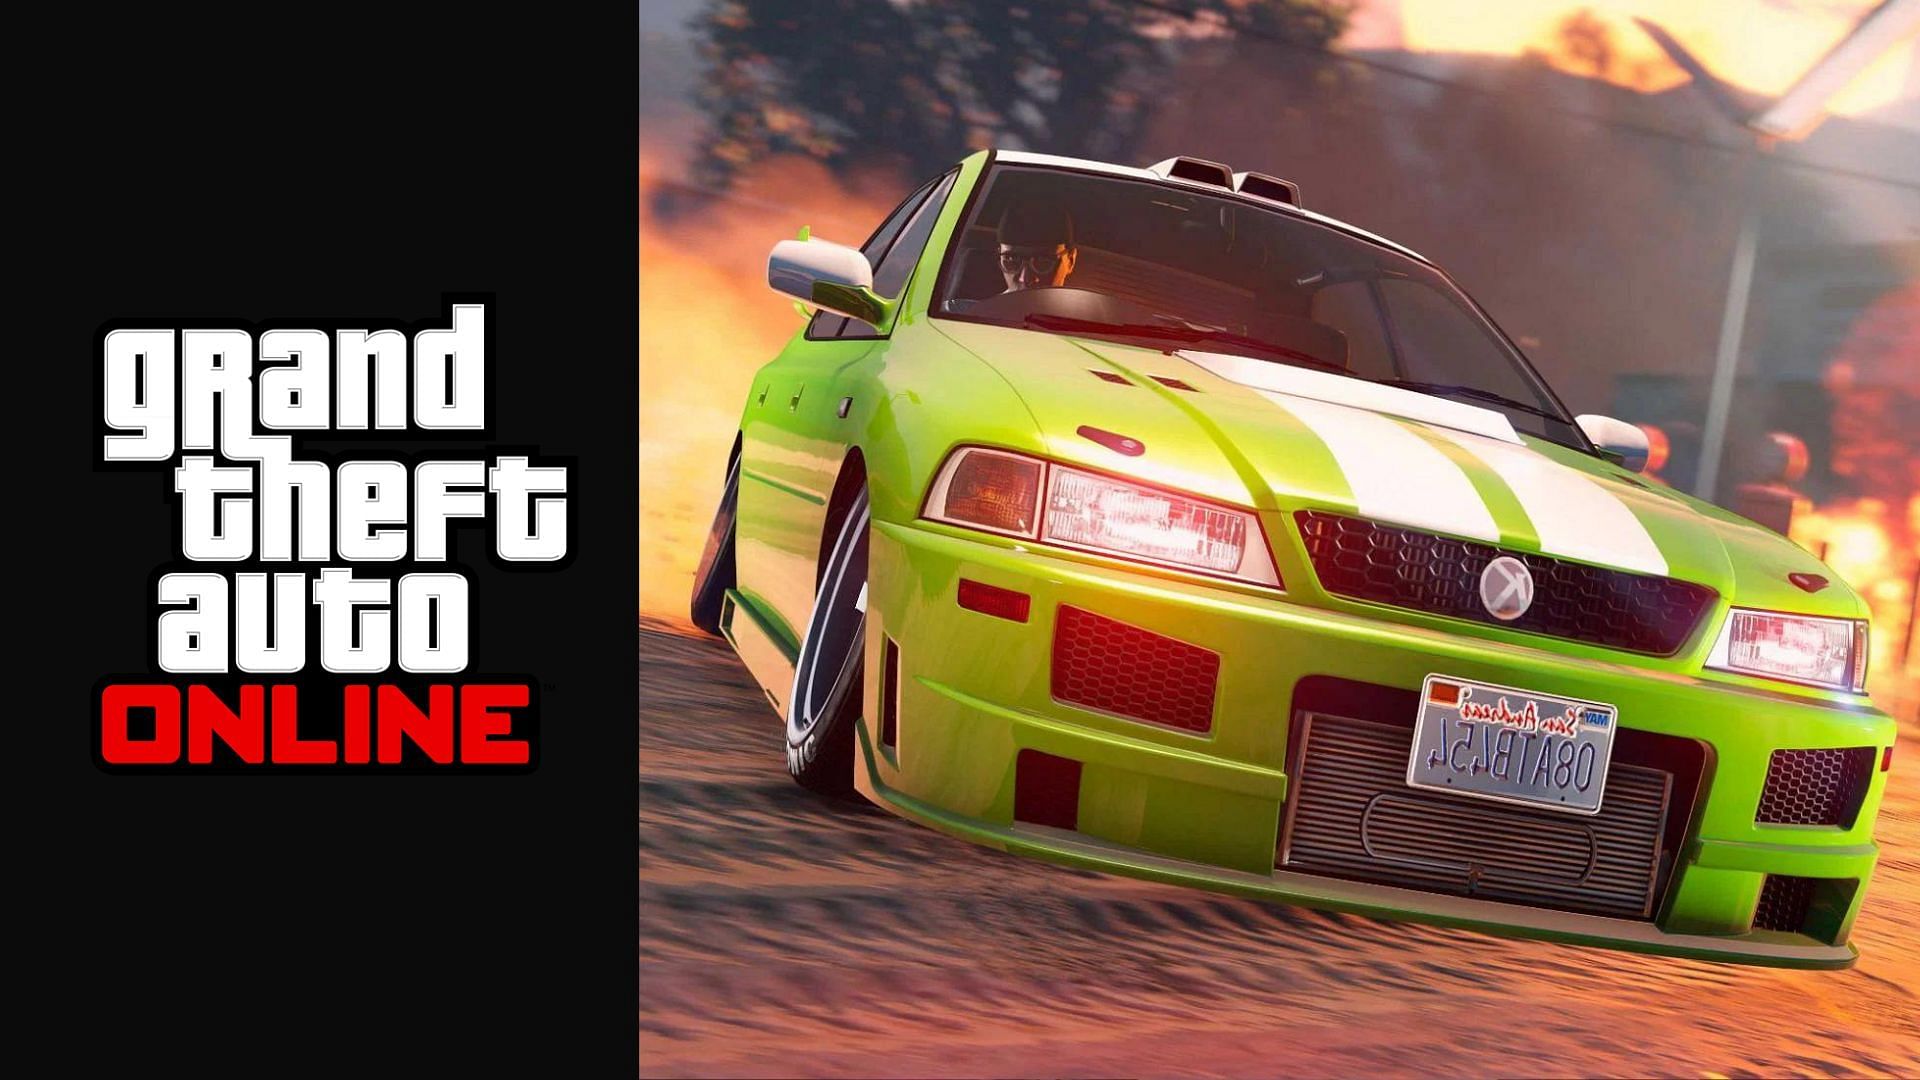 A brief about Karin Sultan Classic that is currently on 40% discount in GTA Online (Image via Sportskeeda)